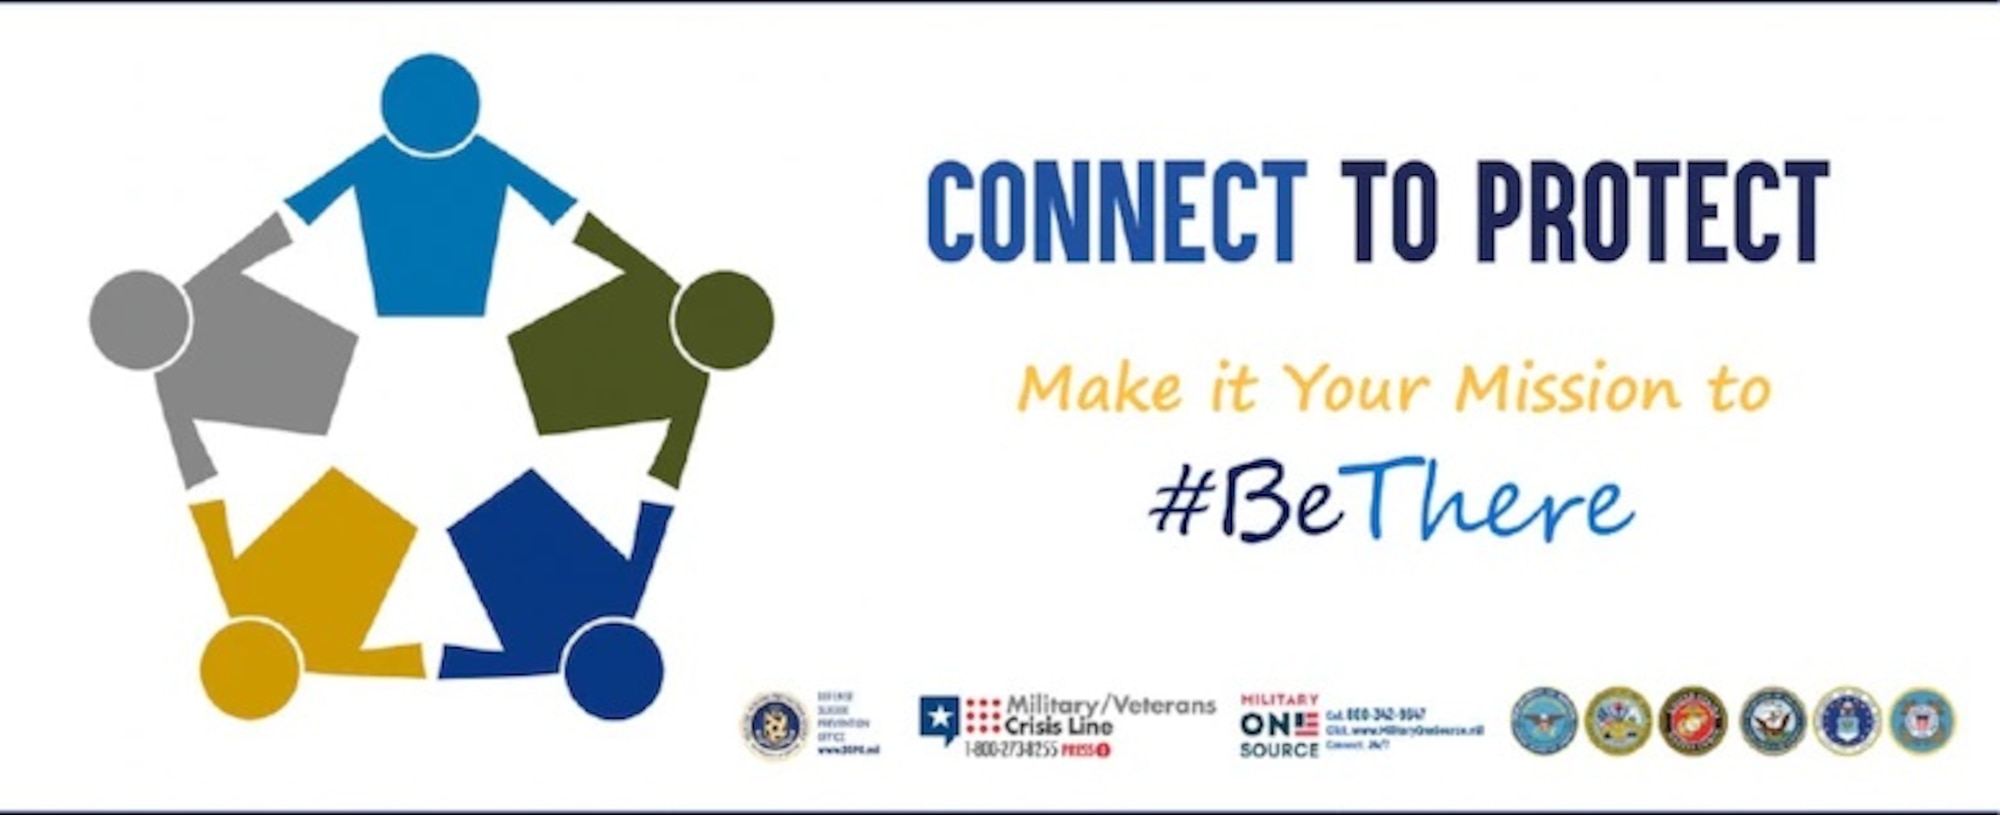 September is Suicide Prevention Month across the Defense Department. This year's theme is "Connect to "Protect." Each service branch is working to raise awareness about suicide and violence prevention and building connected communities. (Defense Department graphic)